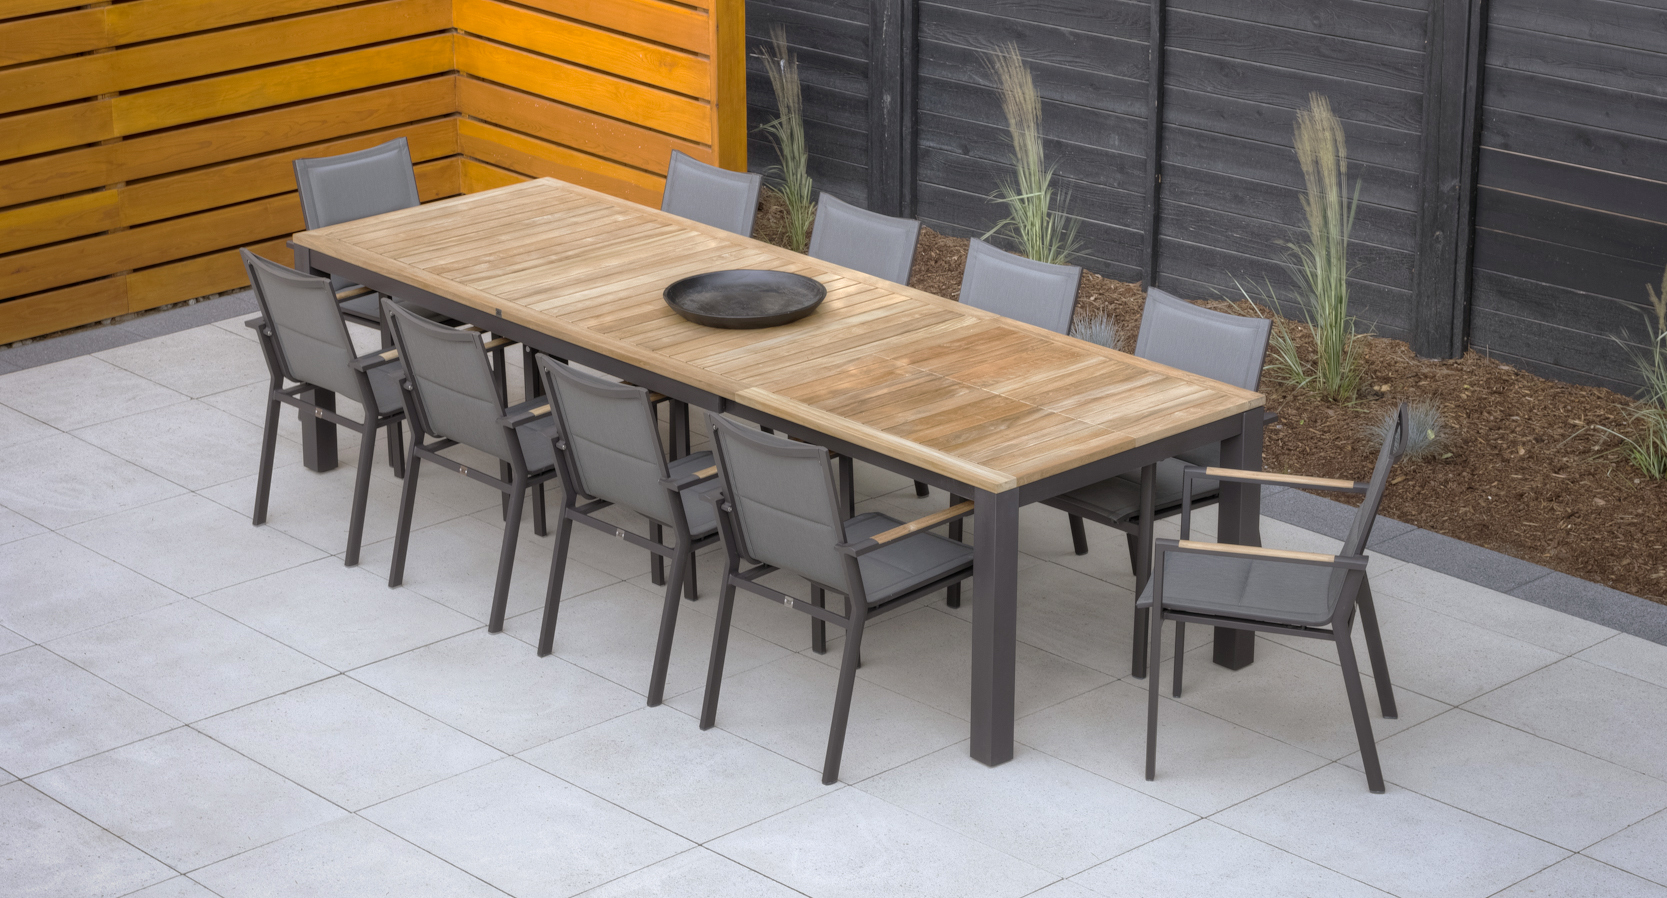 La Paz Asteroid with Teak Dining Arm Chair with Forza Dining Table